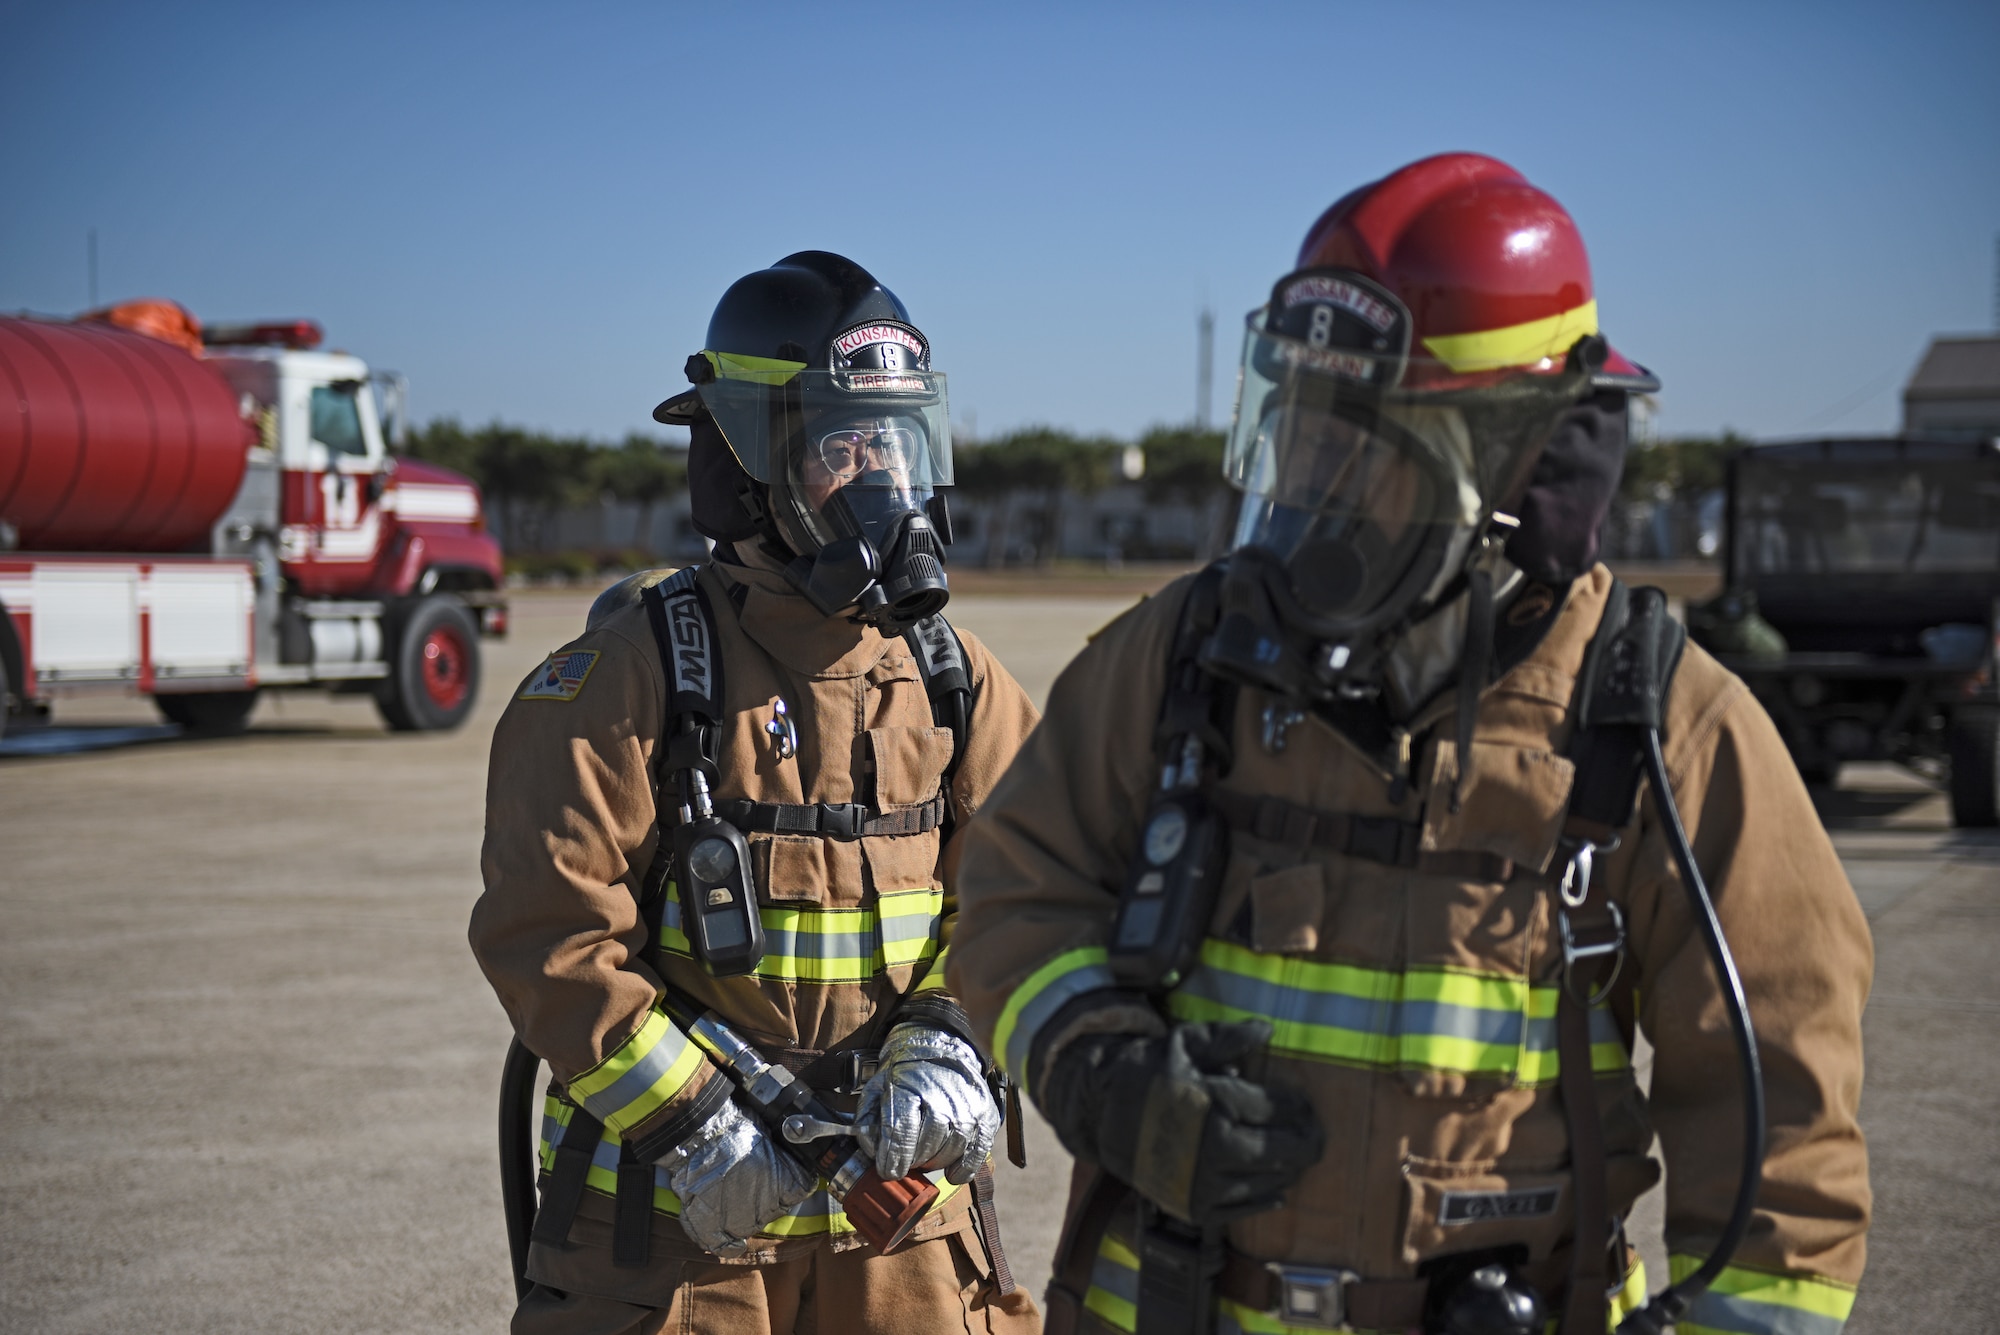 U.S. Air Force firefighters assigned to the 8th Civil Engineer Squadron prepare to conduct live fire training at Kunsan Air Base, Republic of Korea, Nov. 20, 2019. Live aircraft fire training ensures 8th CES firefighters are proficient in the steps needed to properly fight aircraft fires. (U.S. Air Force photo by Staff Sgt. Mackenzie Mendez)